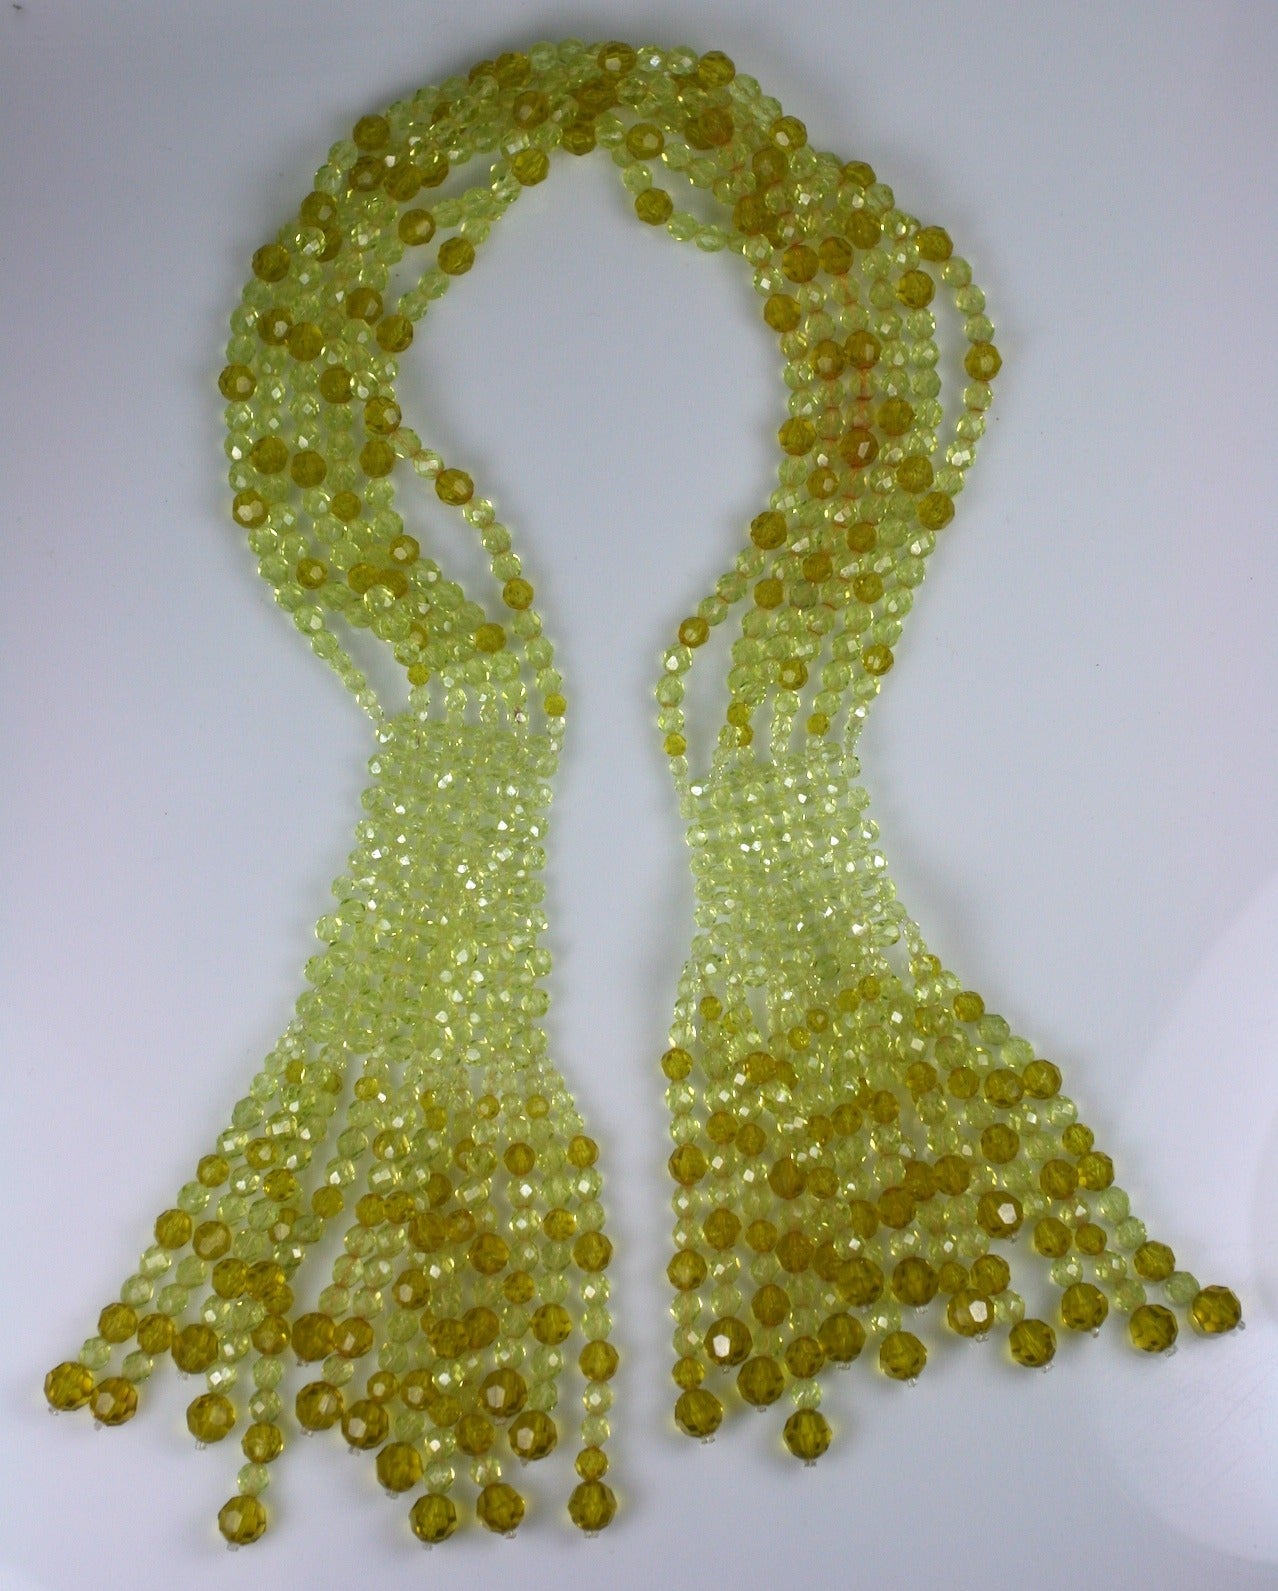 Coppola e Toppo shaded chartreuse crystal beaded crossover scarf necklace. Unusual vaseline coloring with tonal shading. The graduated beads are woven together in sections which release into graduated larger strands in darker tones. Length  33